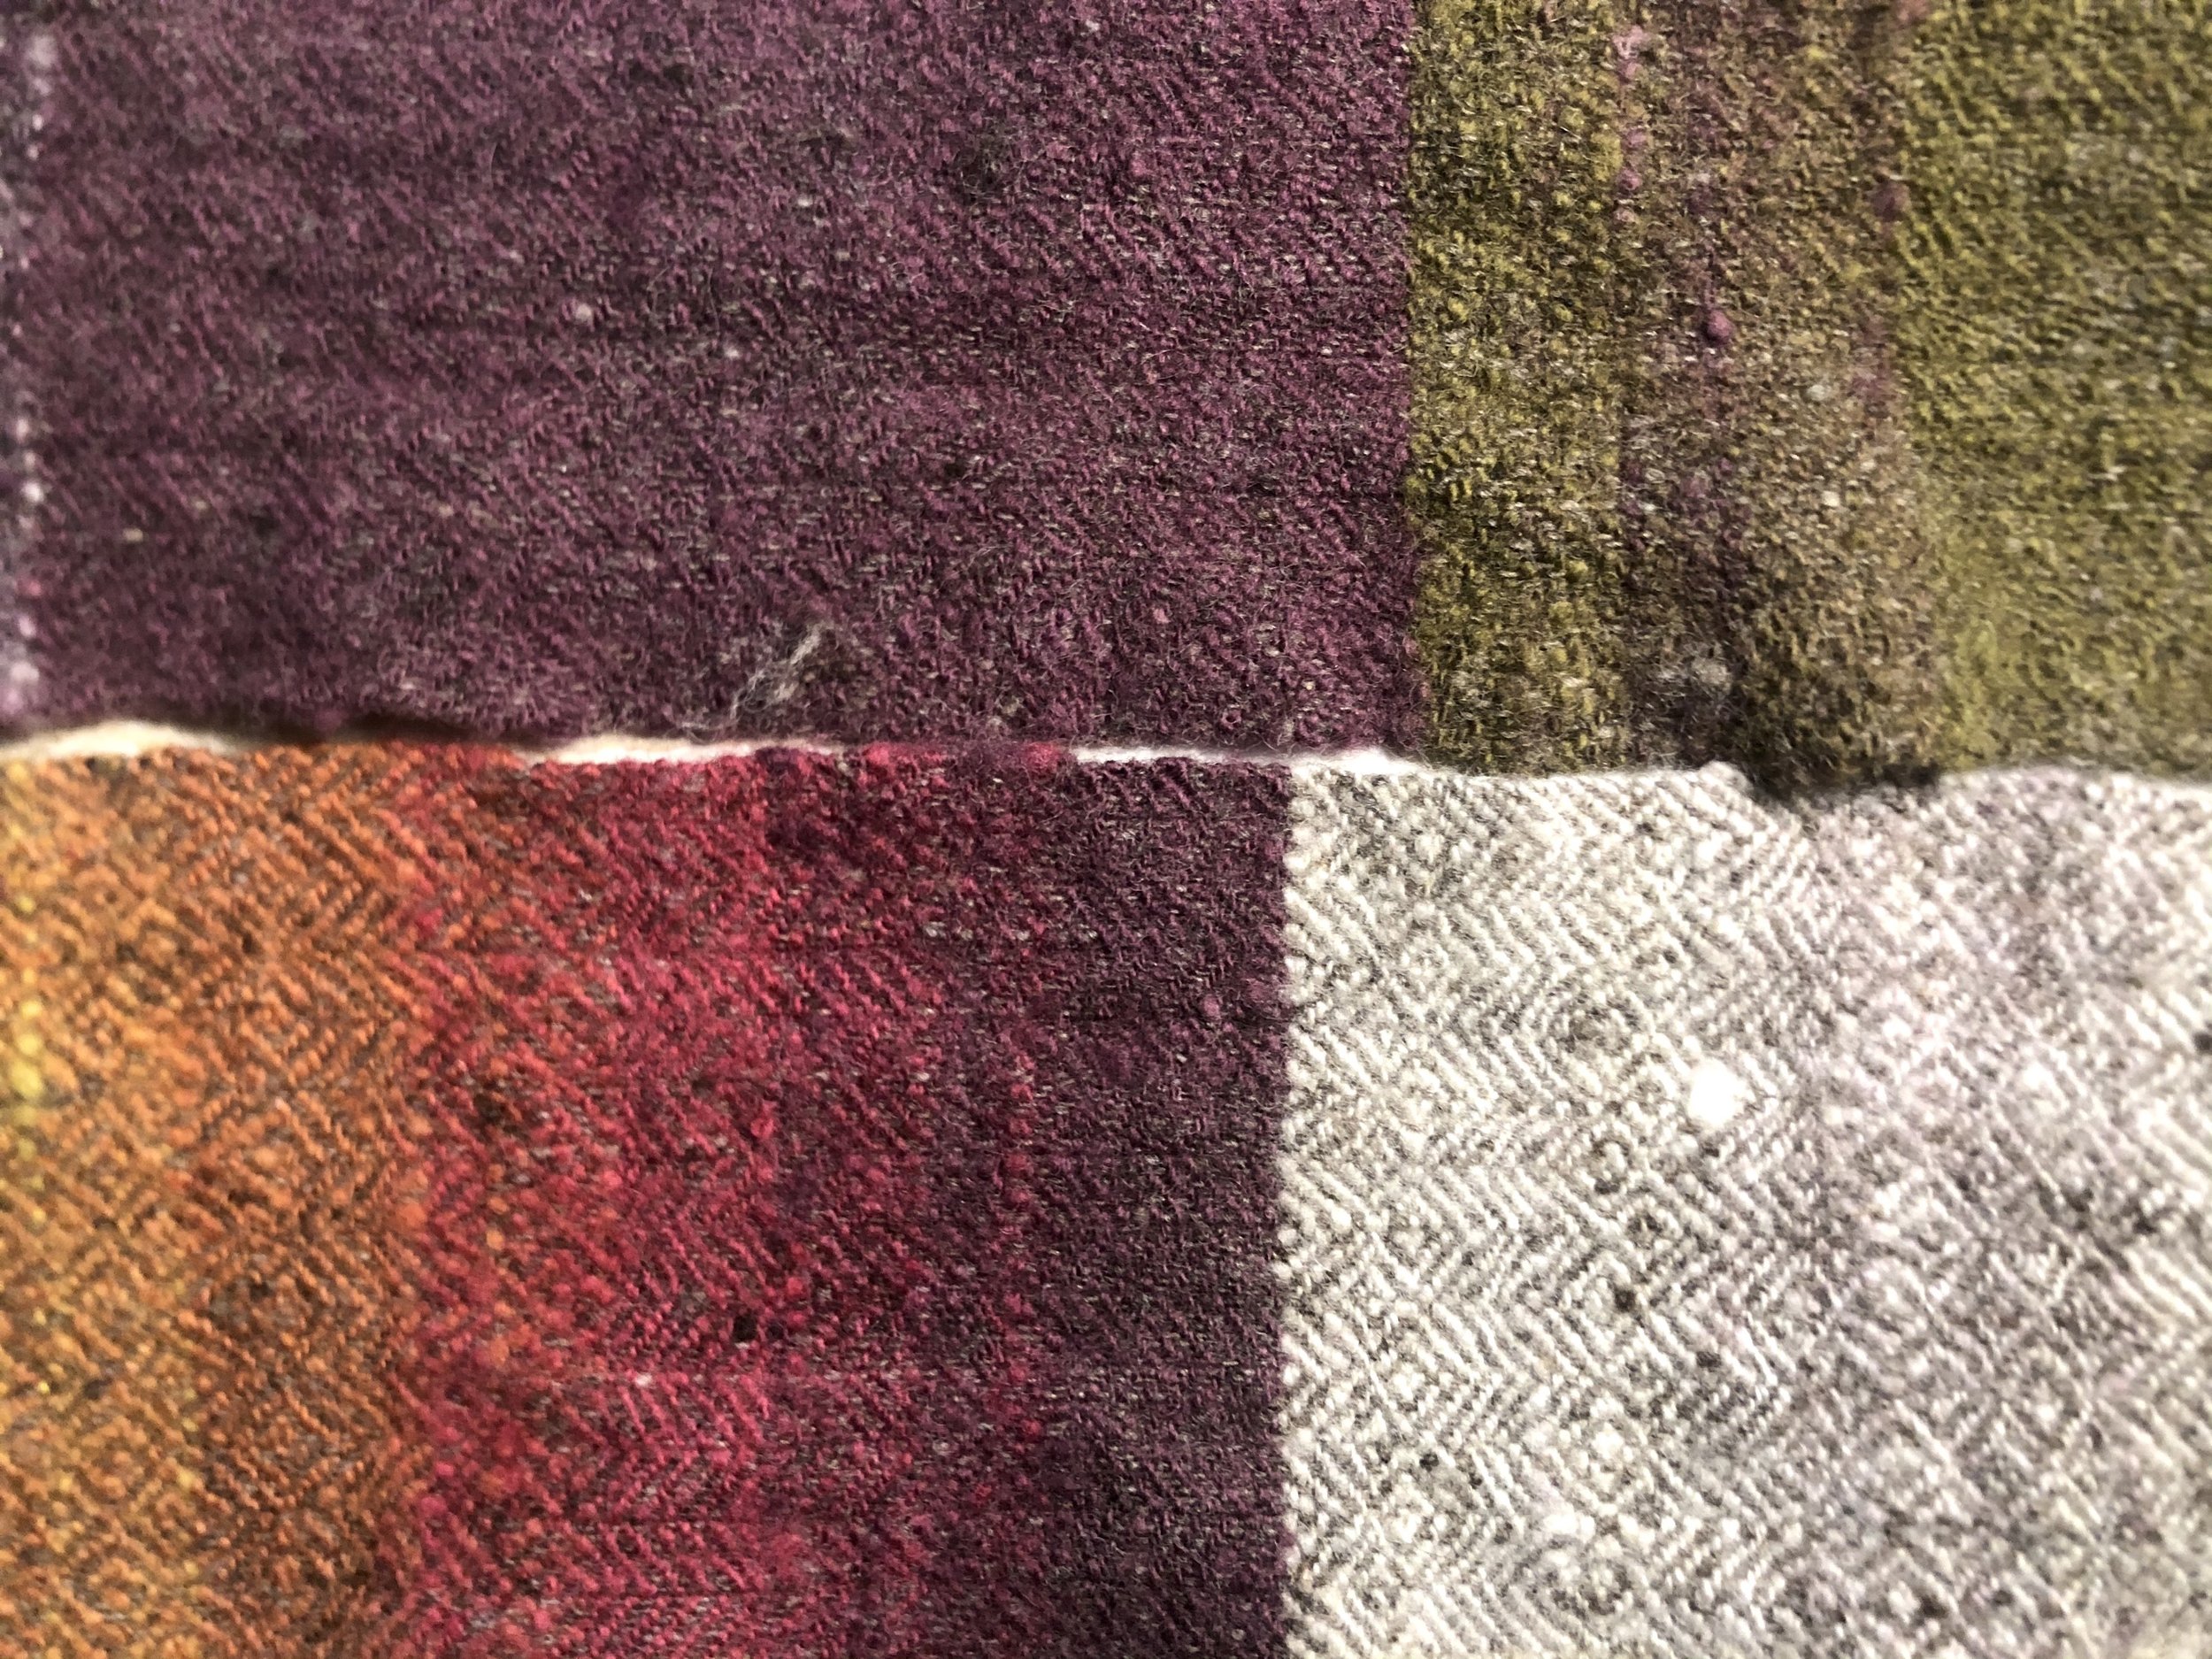  Handspun, hand dyed, and handwoven wool samples, 2021. Dyed with yellow plants, cochineal, and iron. My first entirely handspun wool fabric. 